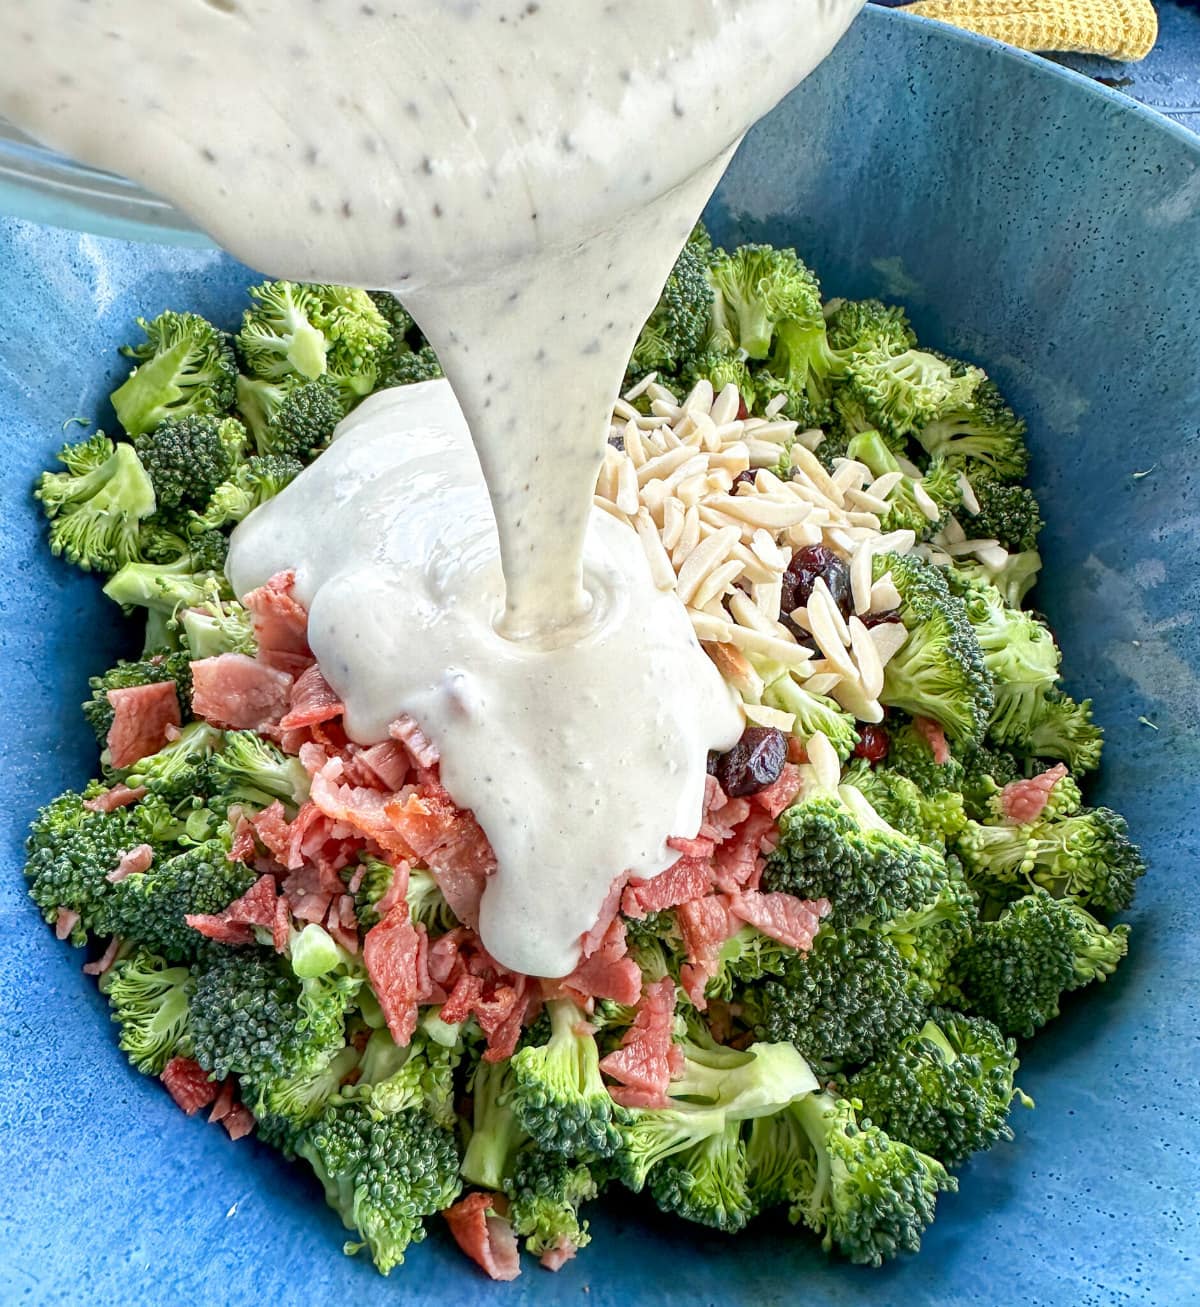 creamy coleslaw dressing being poured over bacon, cranberries, almonds and broccoli florets